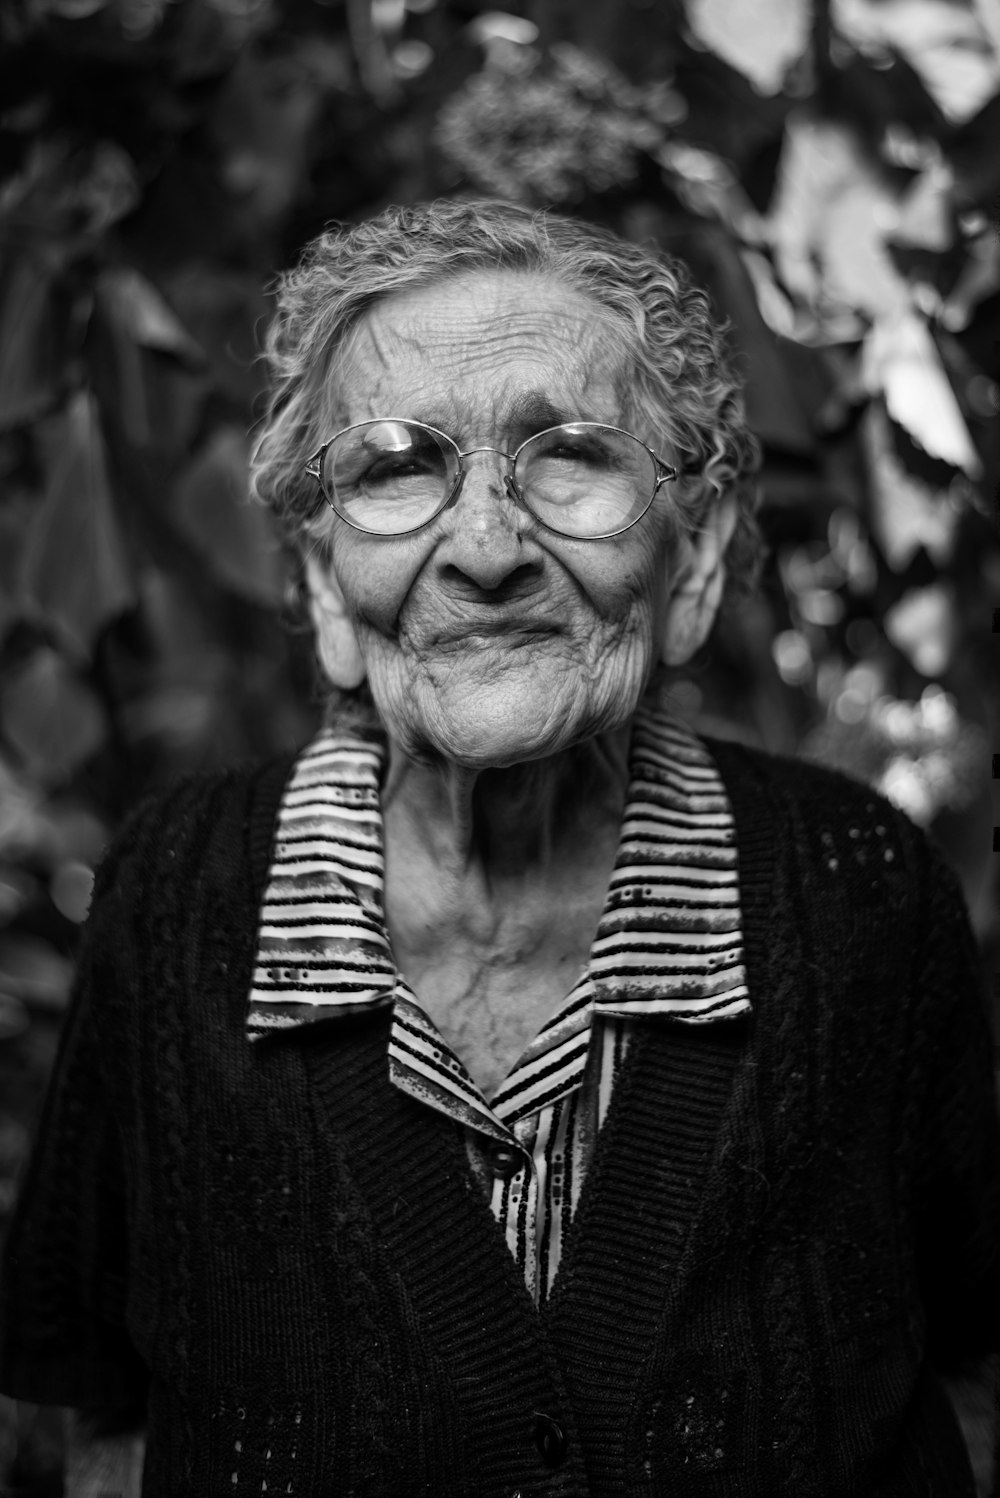 An old retired women with circular glasses in a black and white close-up macro portrait.